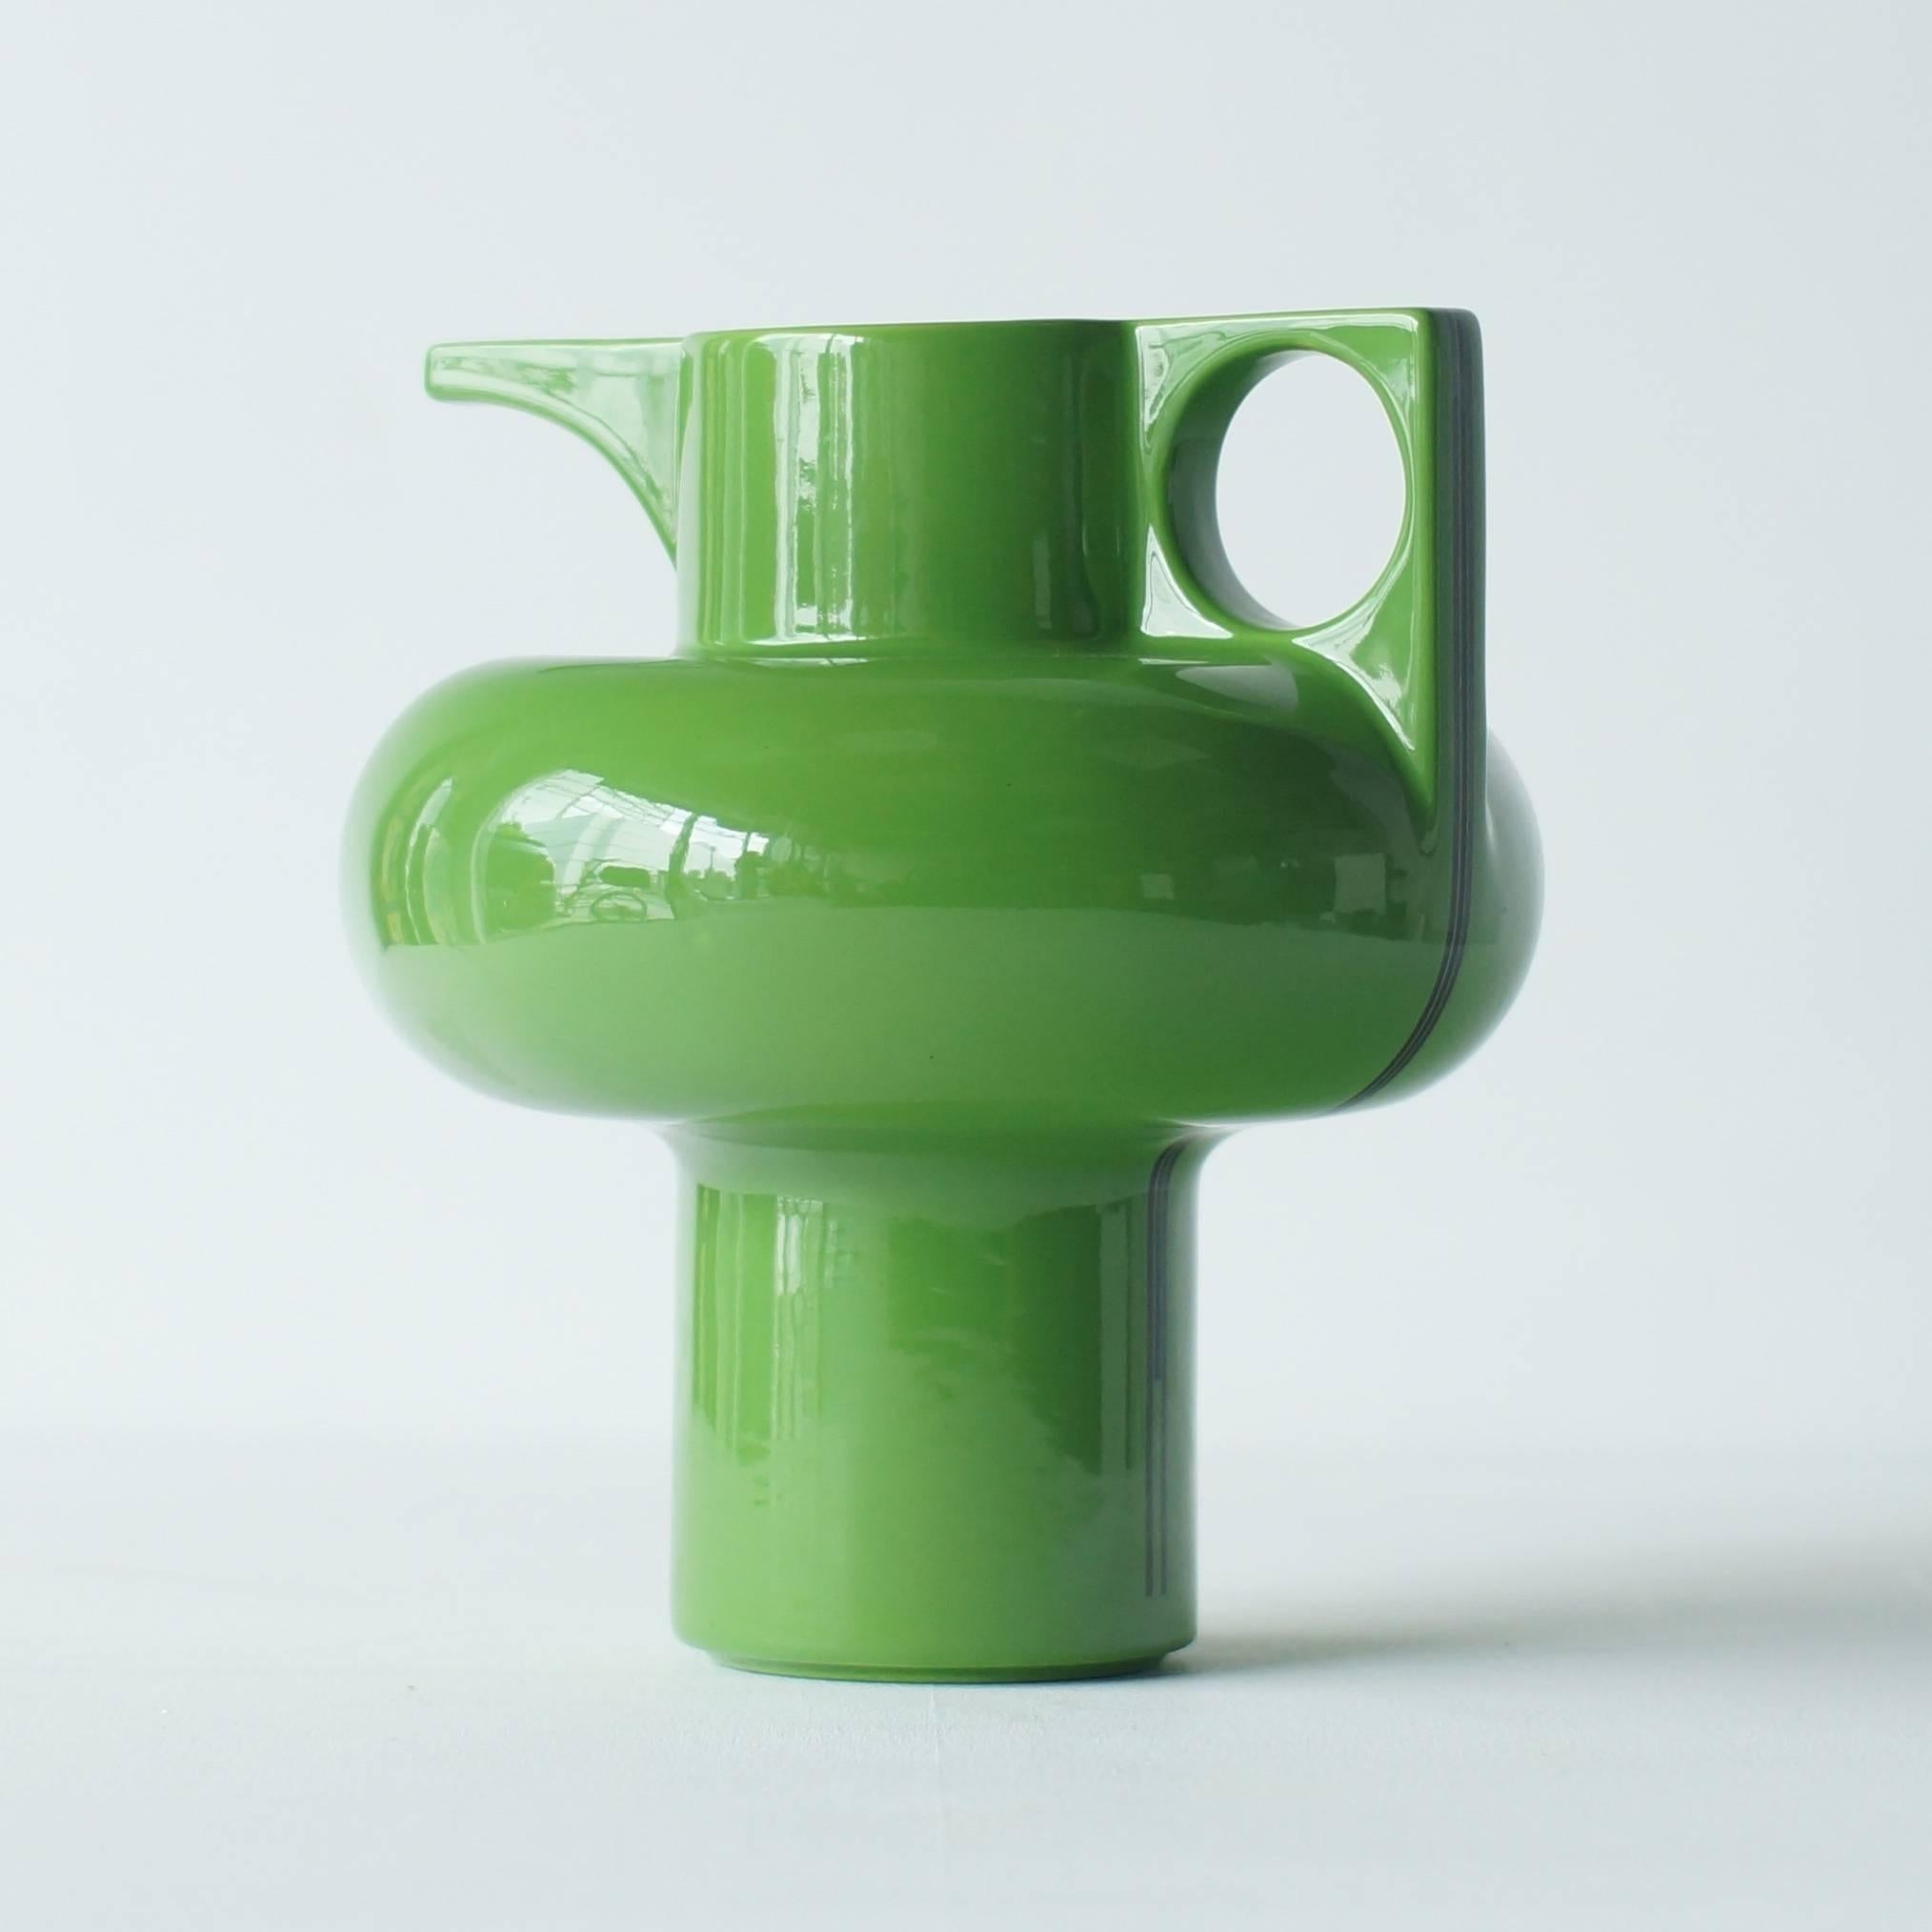 Sergio Asti Pitcher shaped flower vase released by Cedit in the late 1960s.